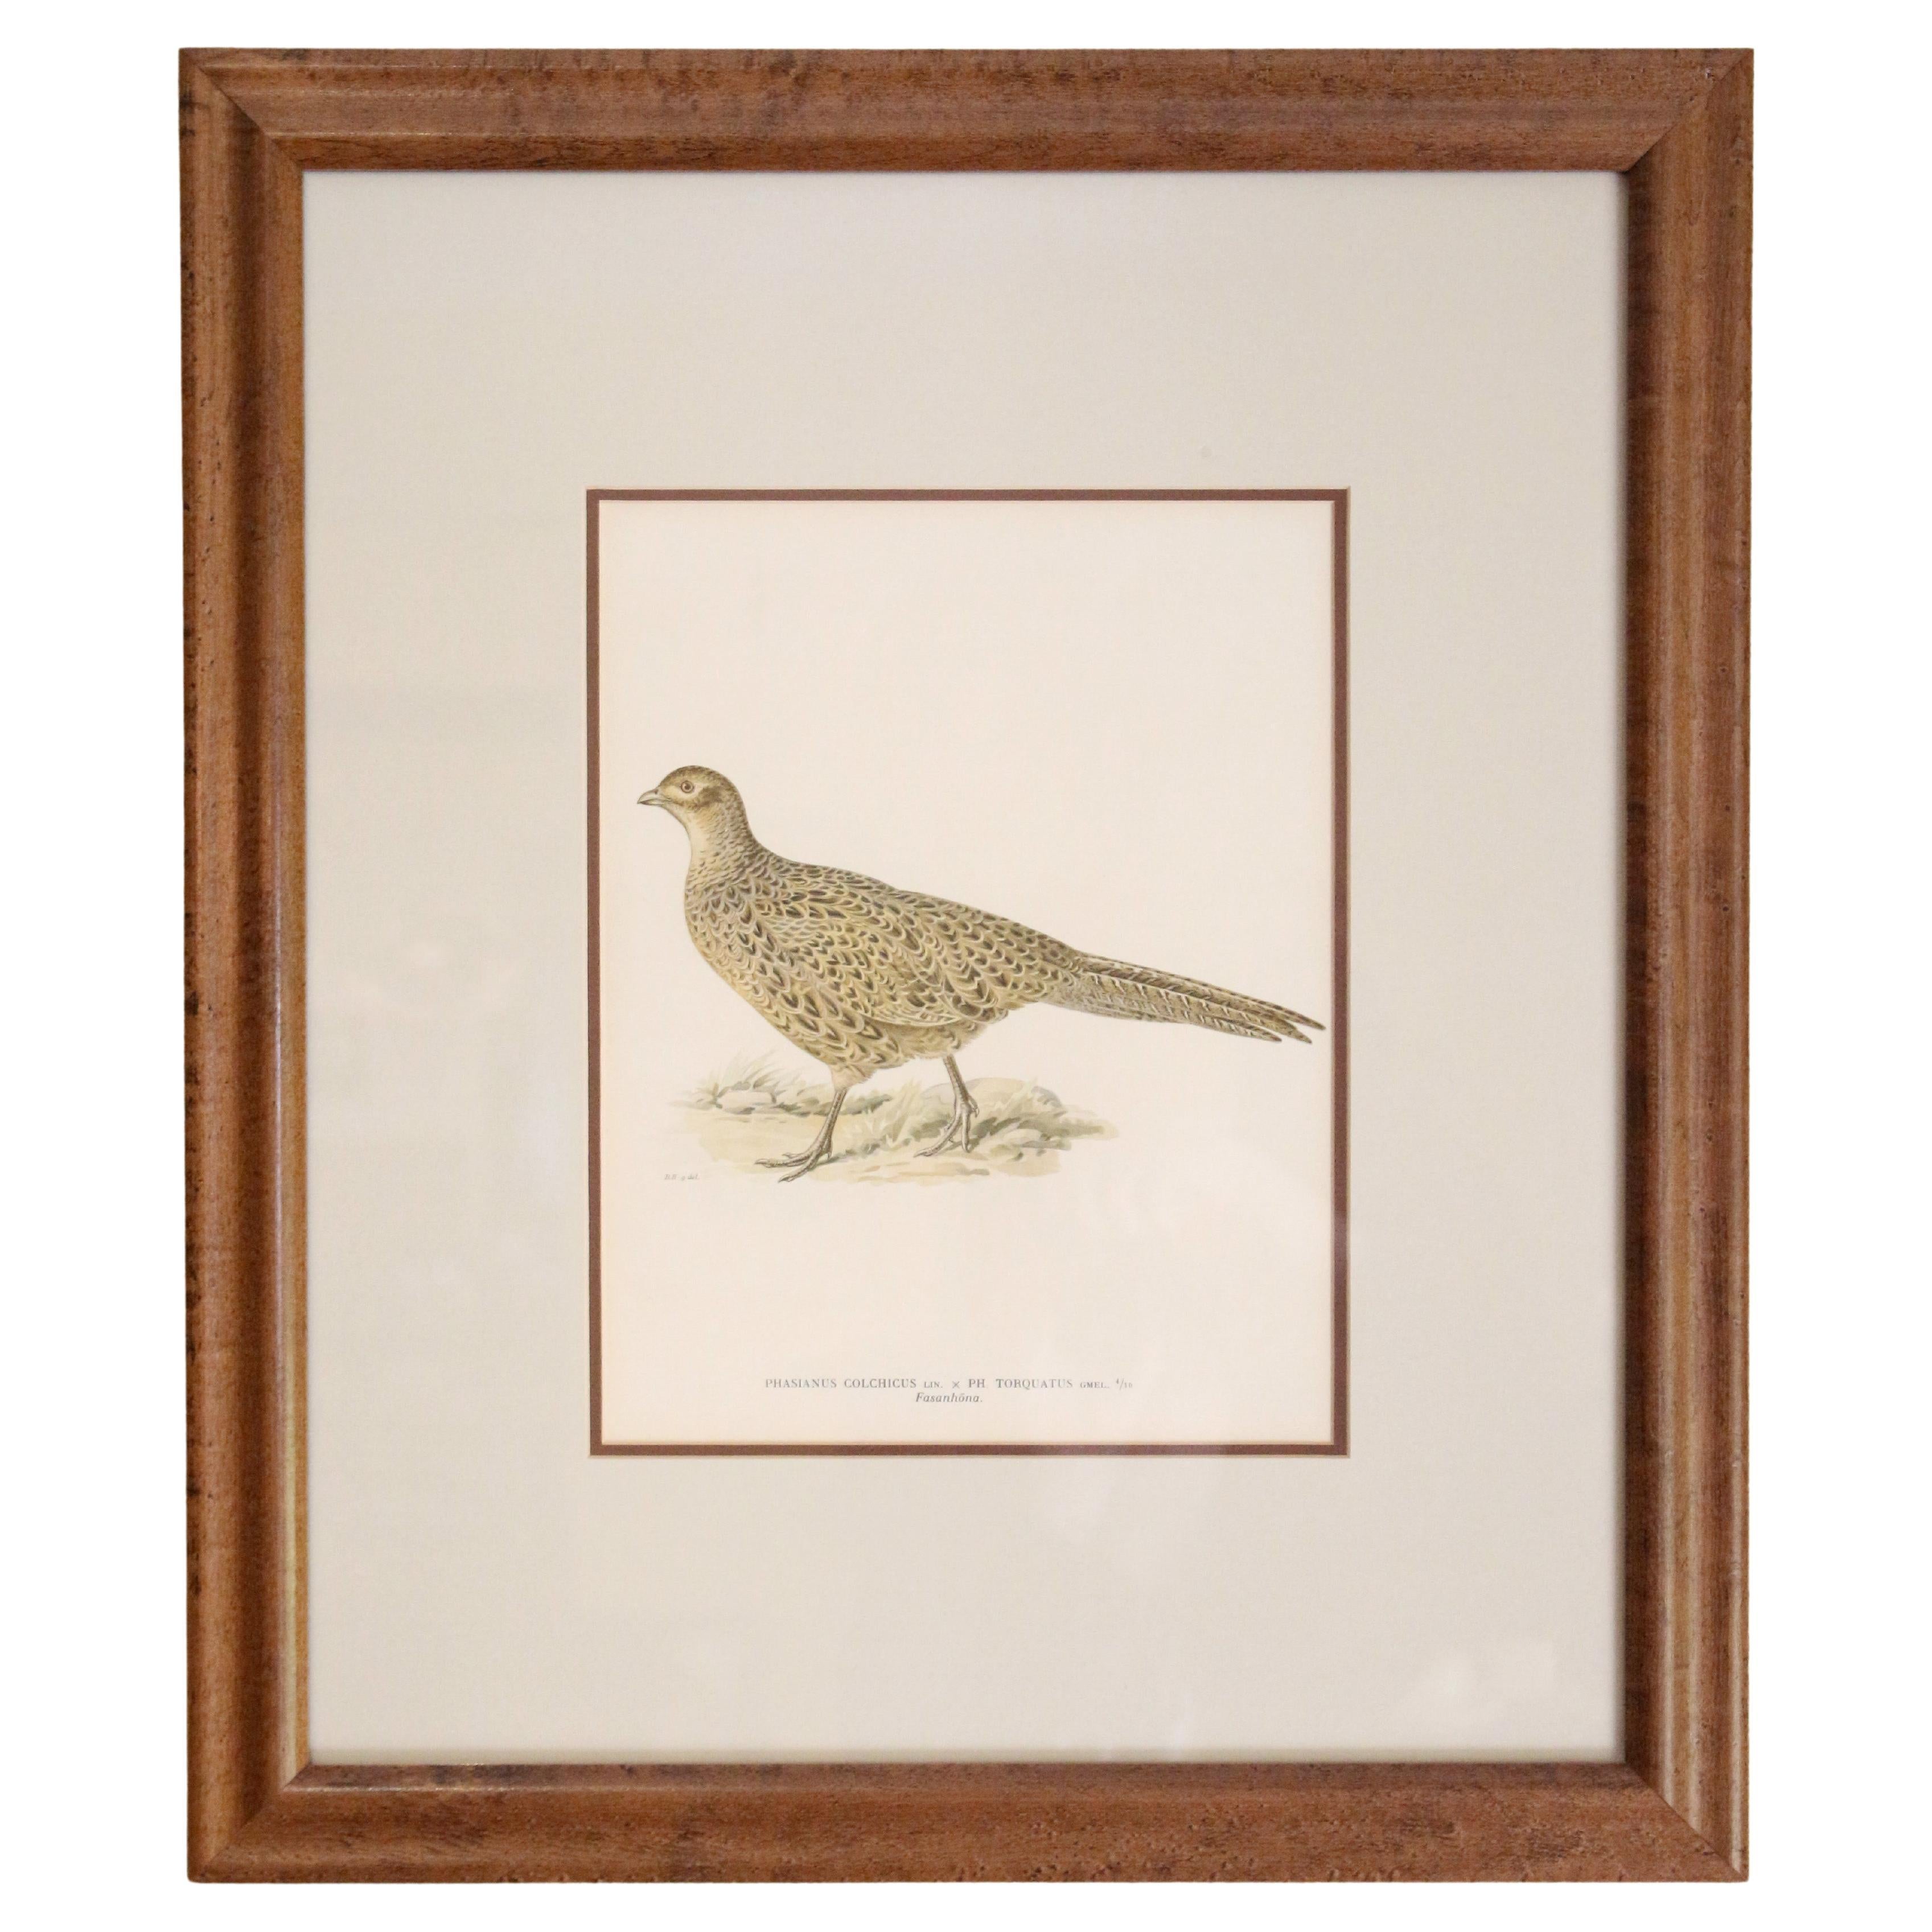 Late 19th Century "Ring-necked Hen Pheasant" Chromolithograph by von Wrights